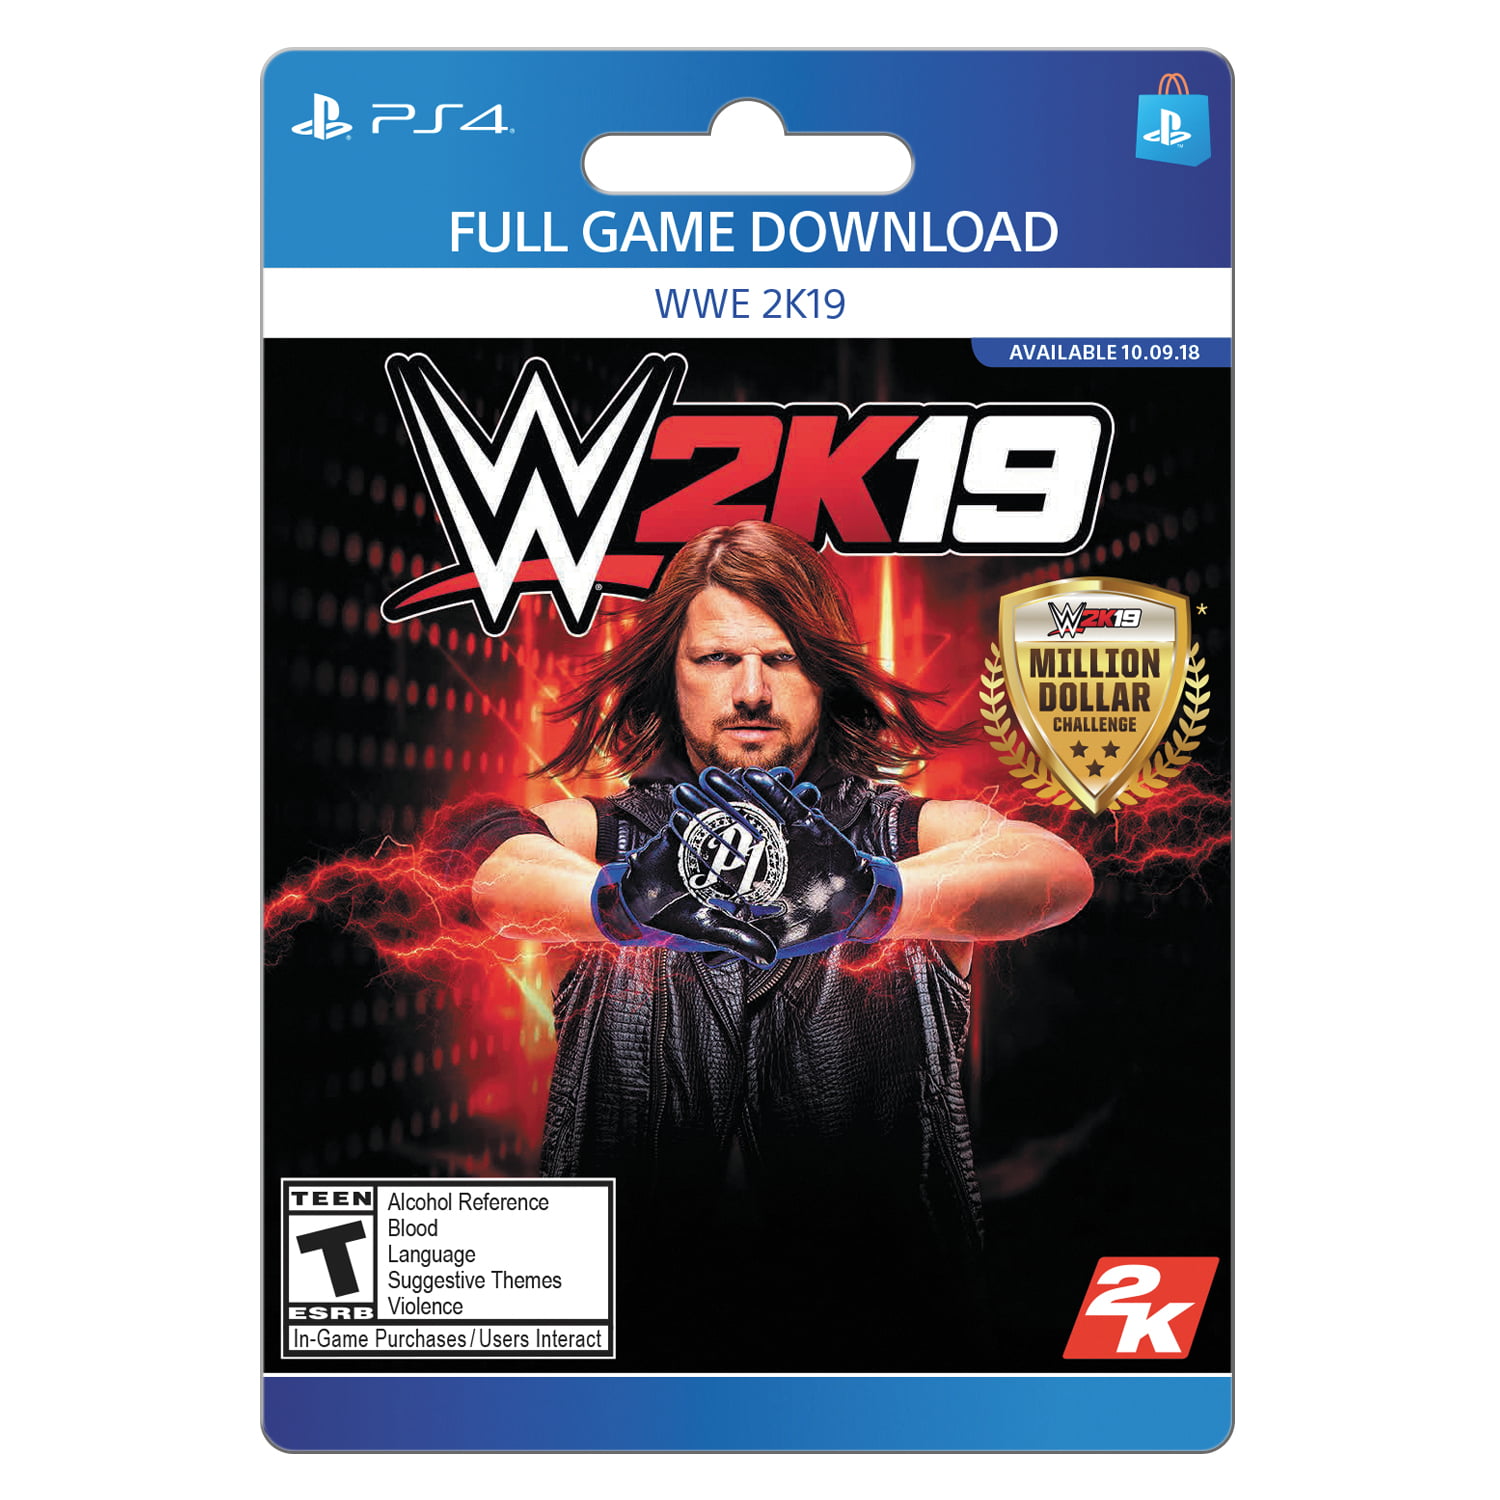 Wwe ps4 купить. WWE ps4. WWE 2k22 for ps4™ обложка. WWE 2k22 обложка ps4.